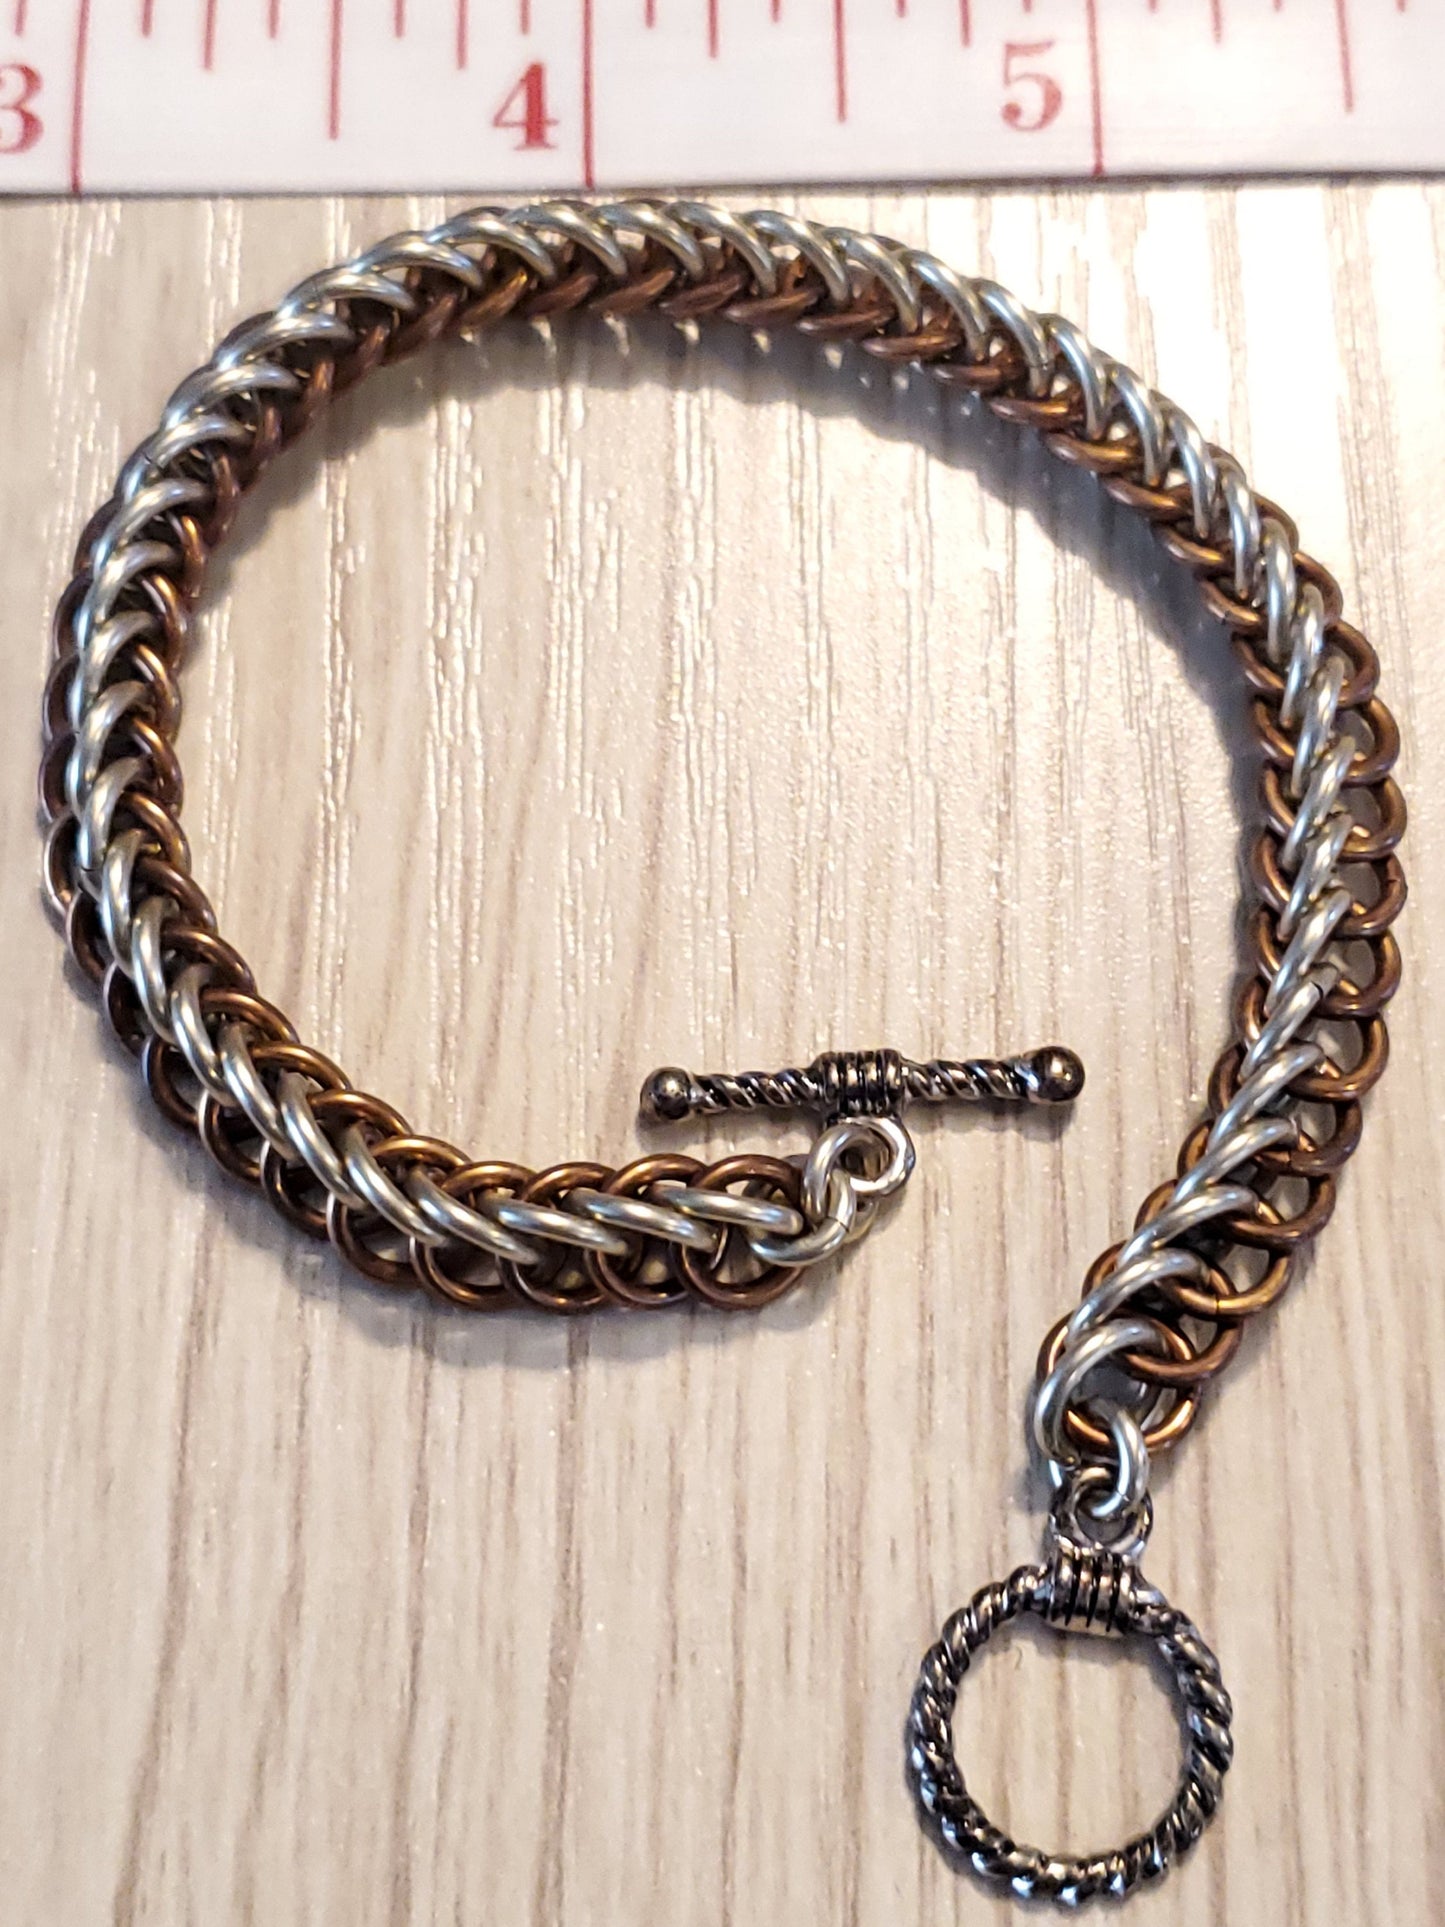 Copper and Aluminum Half Persian Bracelet with Toggle Clasp